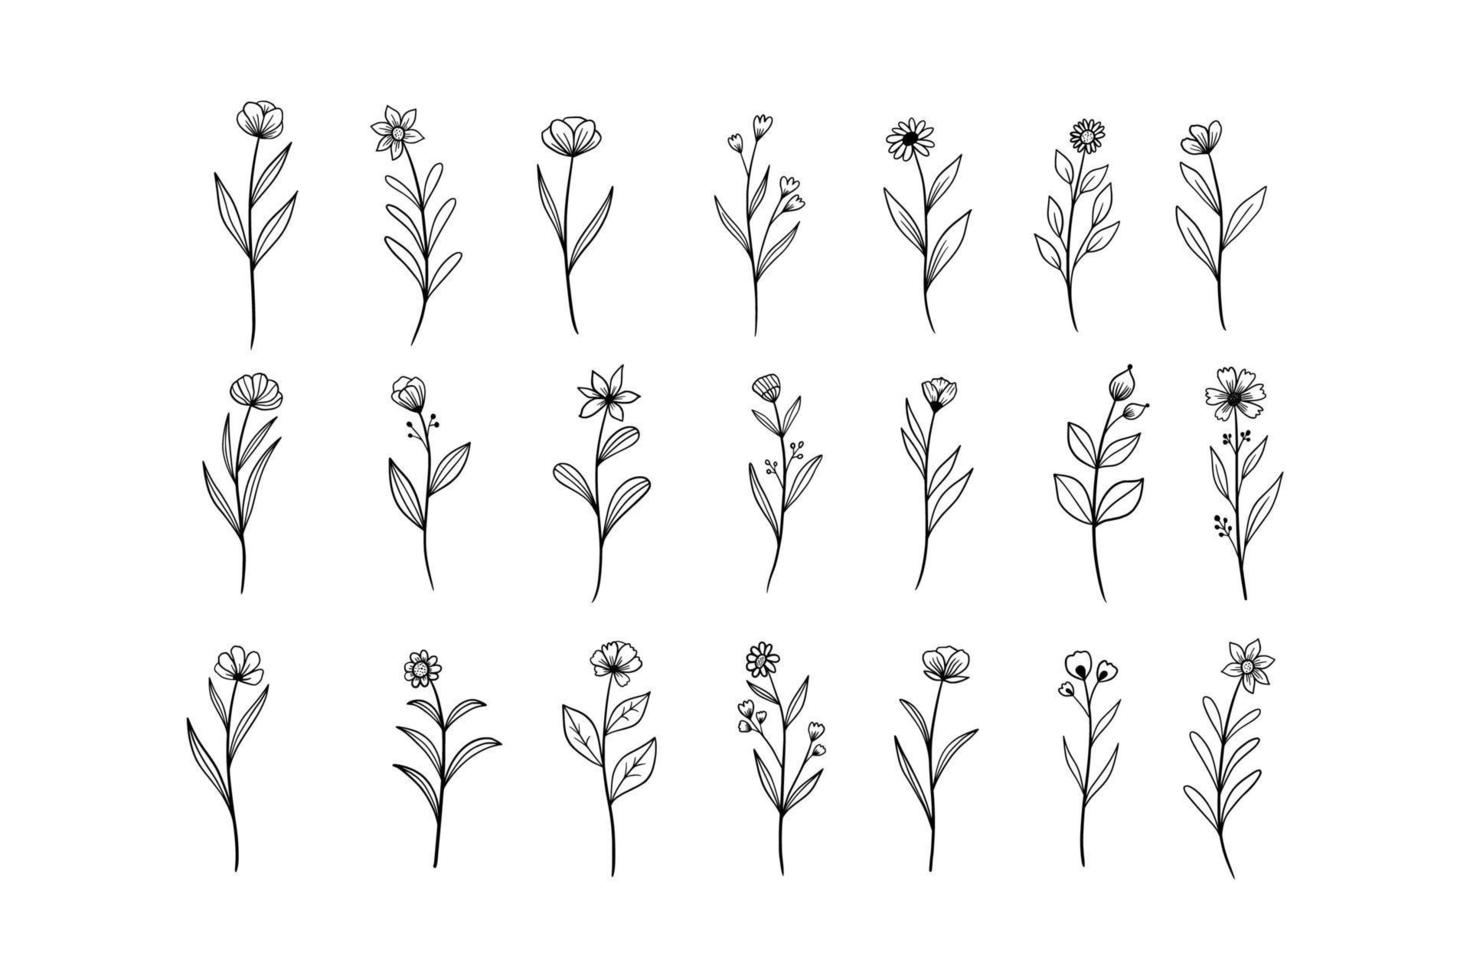 Hand Drawn Wildflower Line Art Illustrations. Botanical and Natural Designs for Invitations, Posters, and Digital Art vector